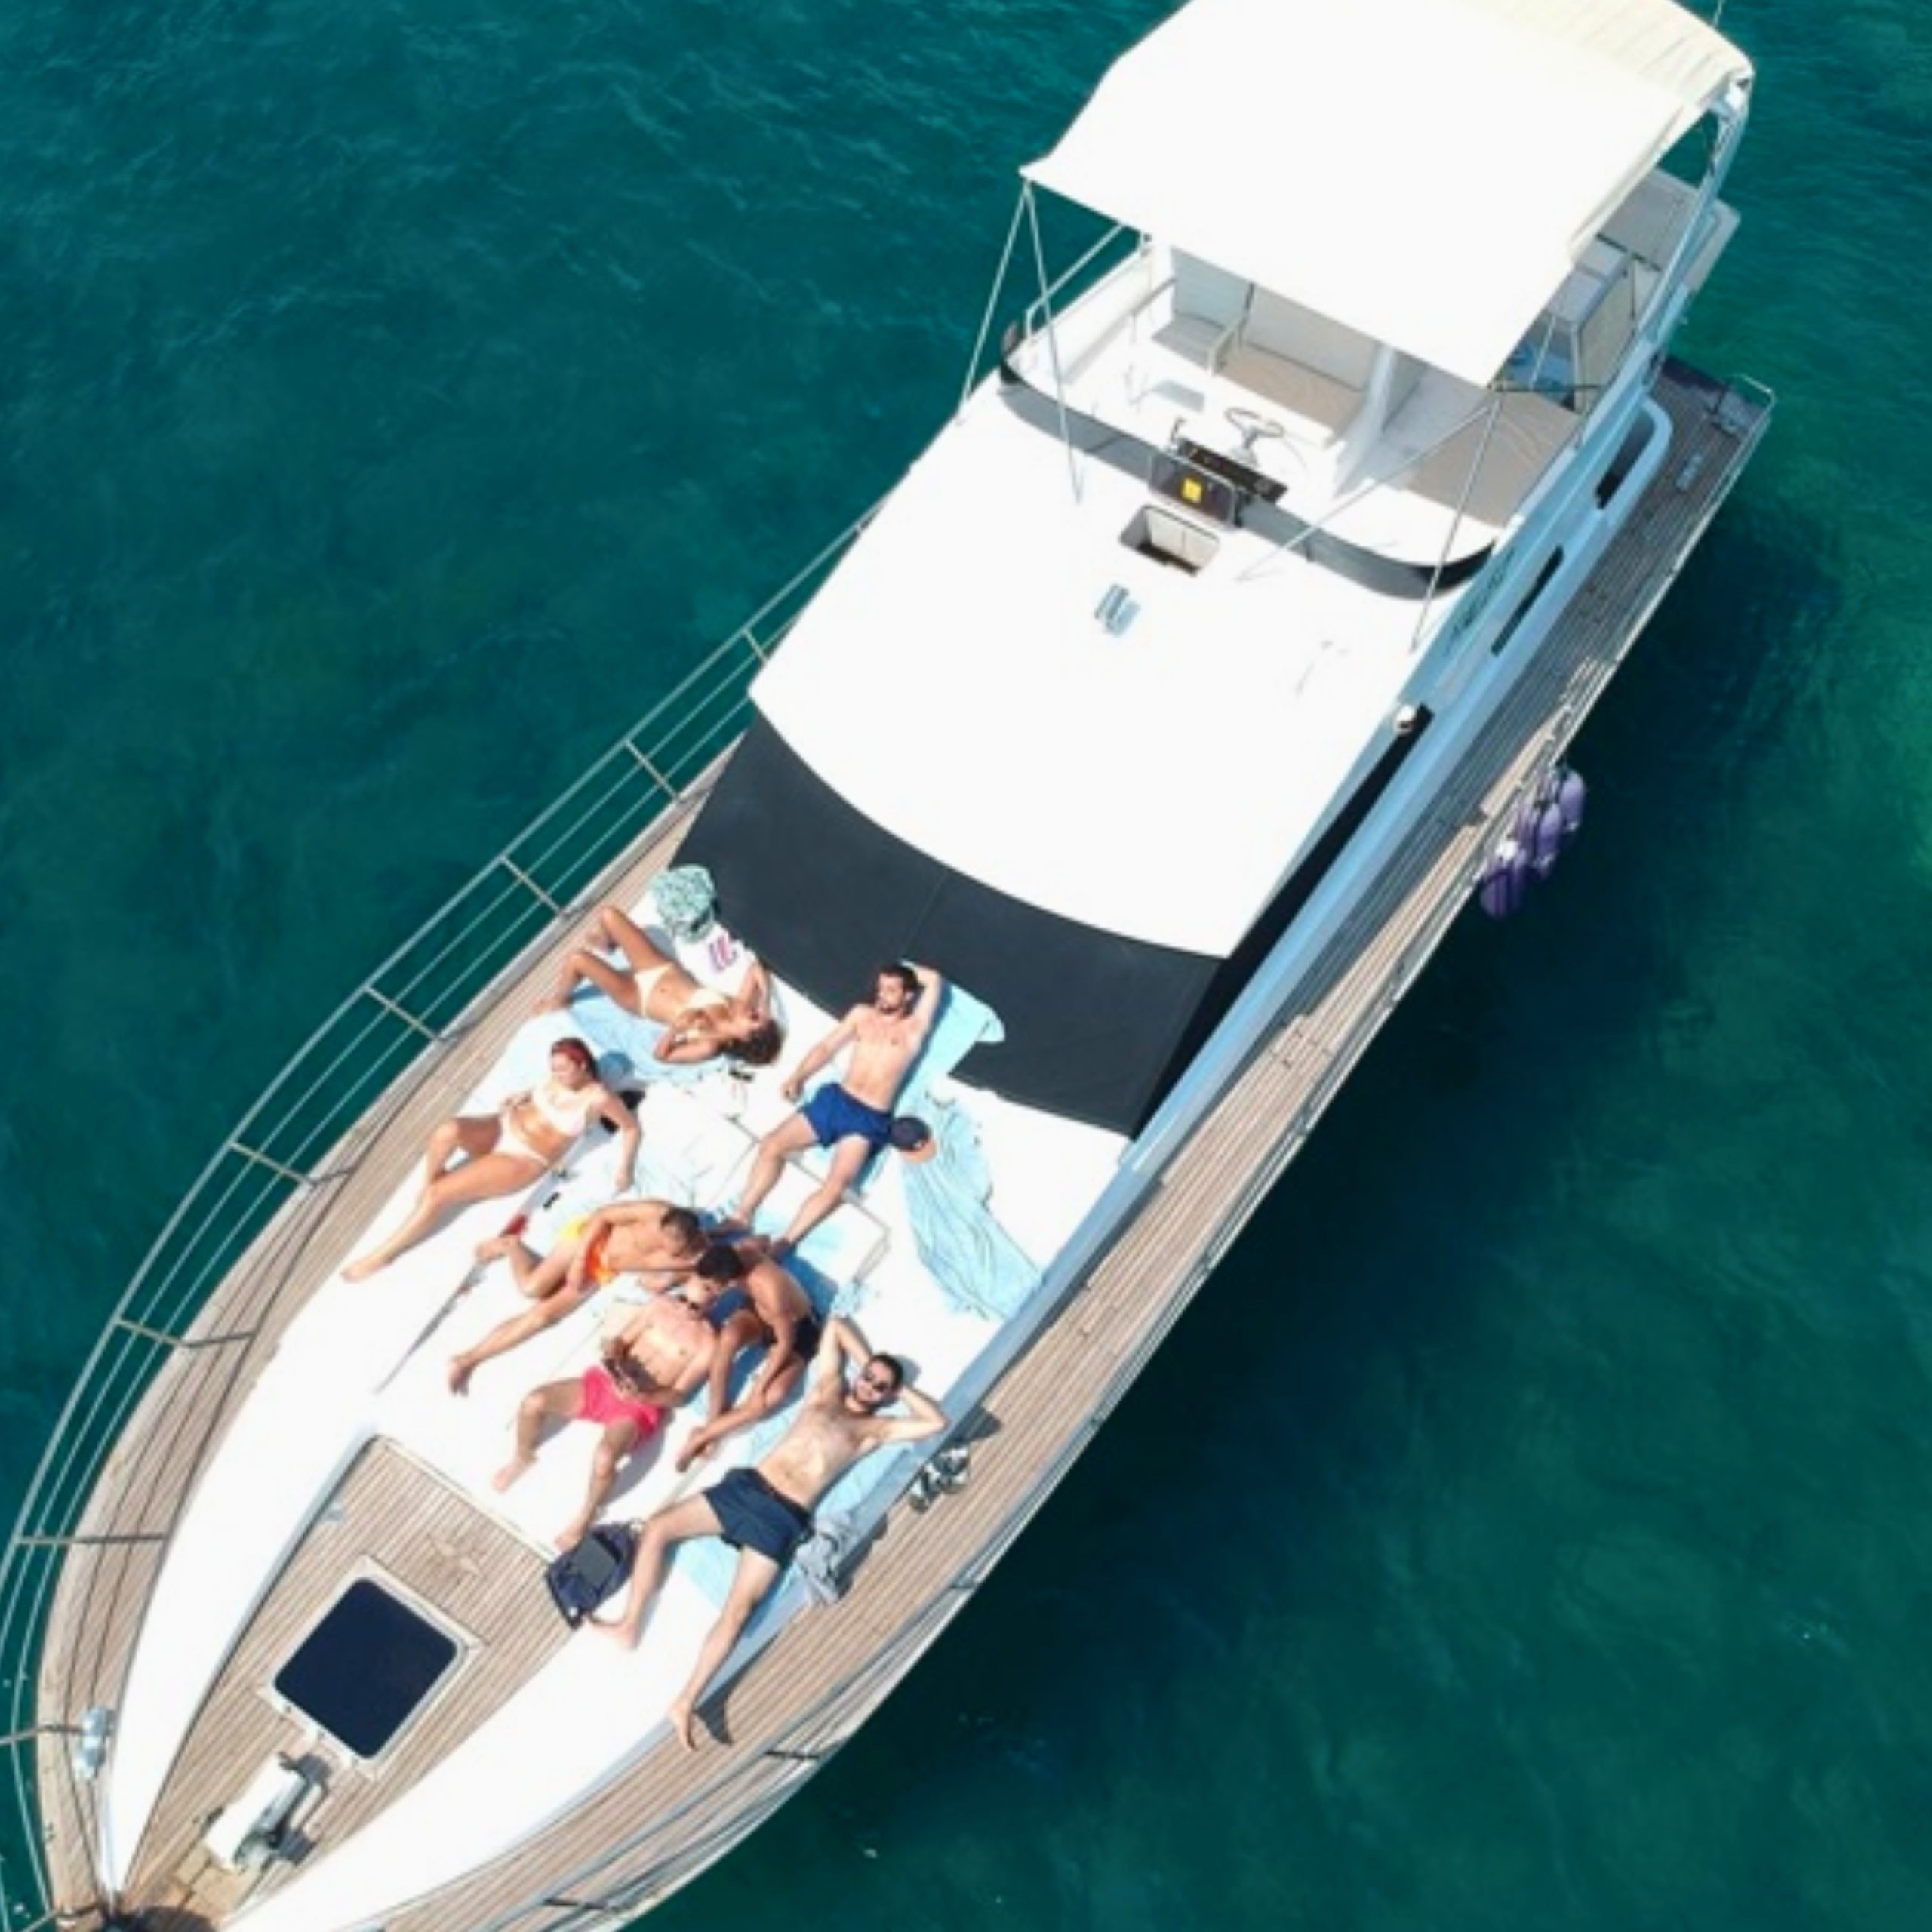 Discover the Secrets of Kemer: Private Boat Tour